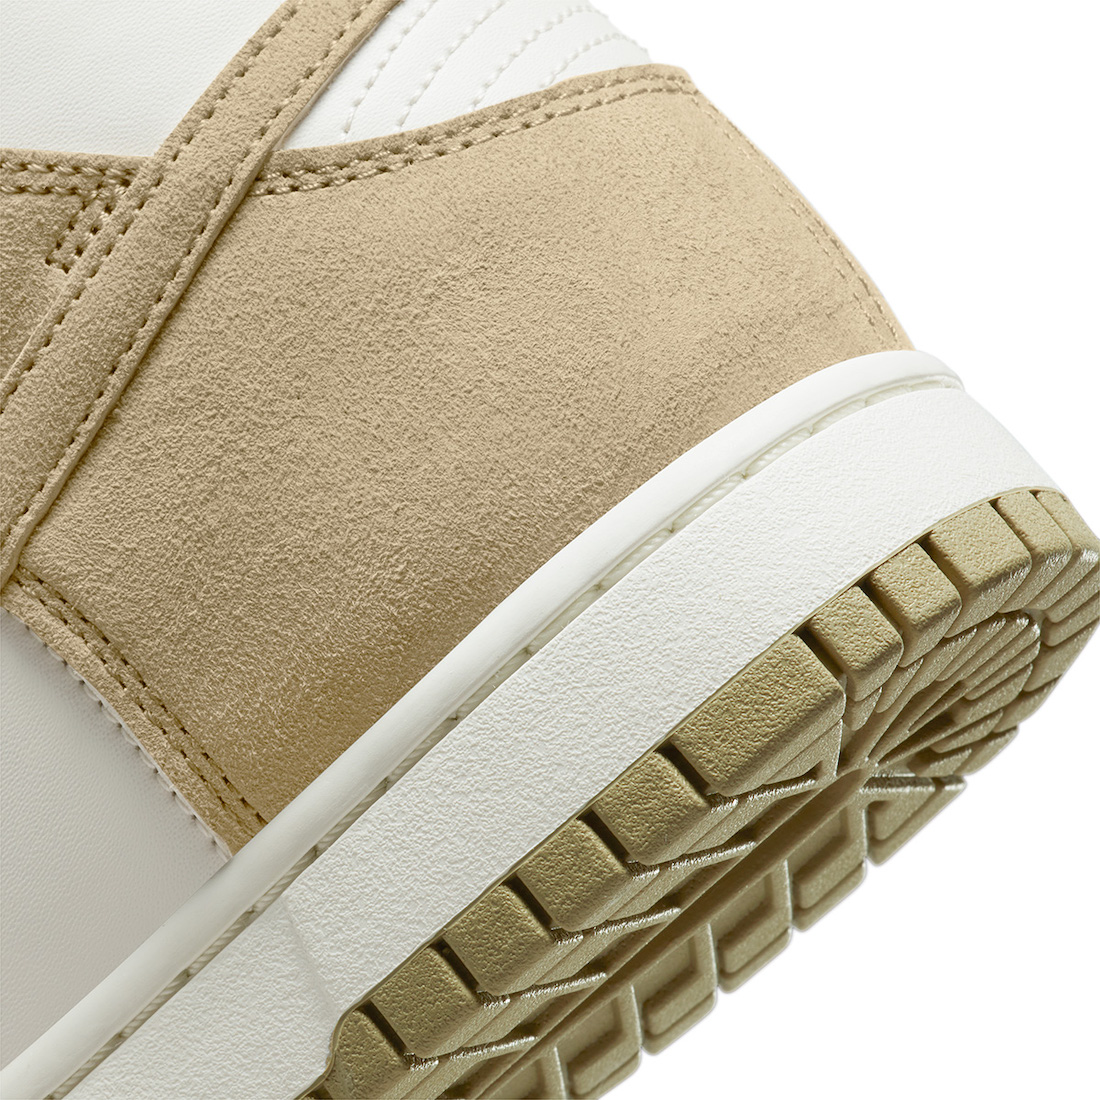 Nike Dunk High White Tan Suede DQ7679-001 Release Date